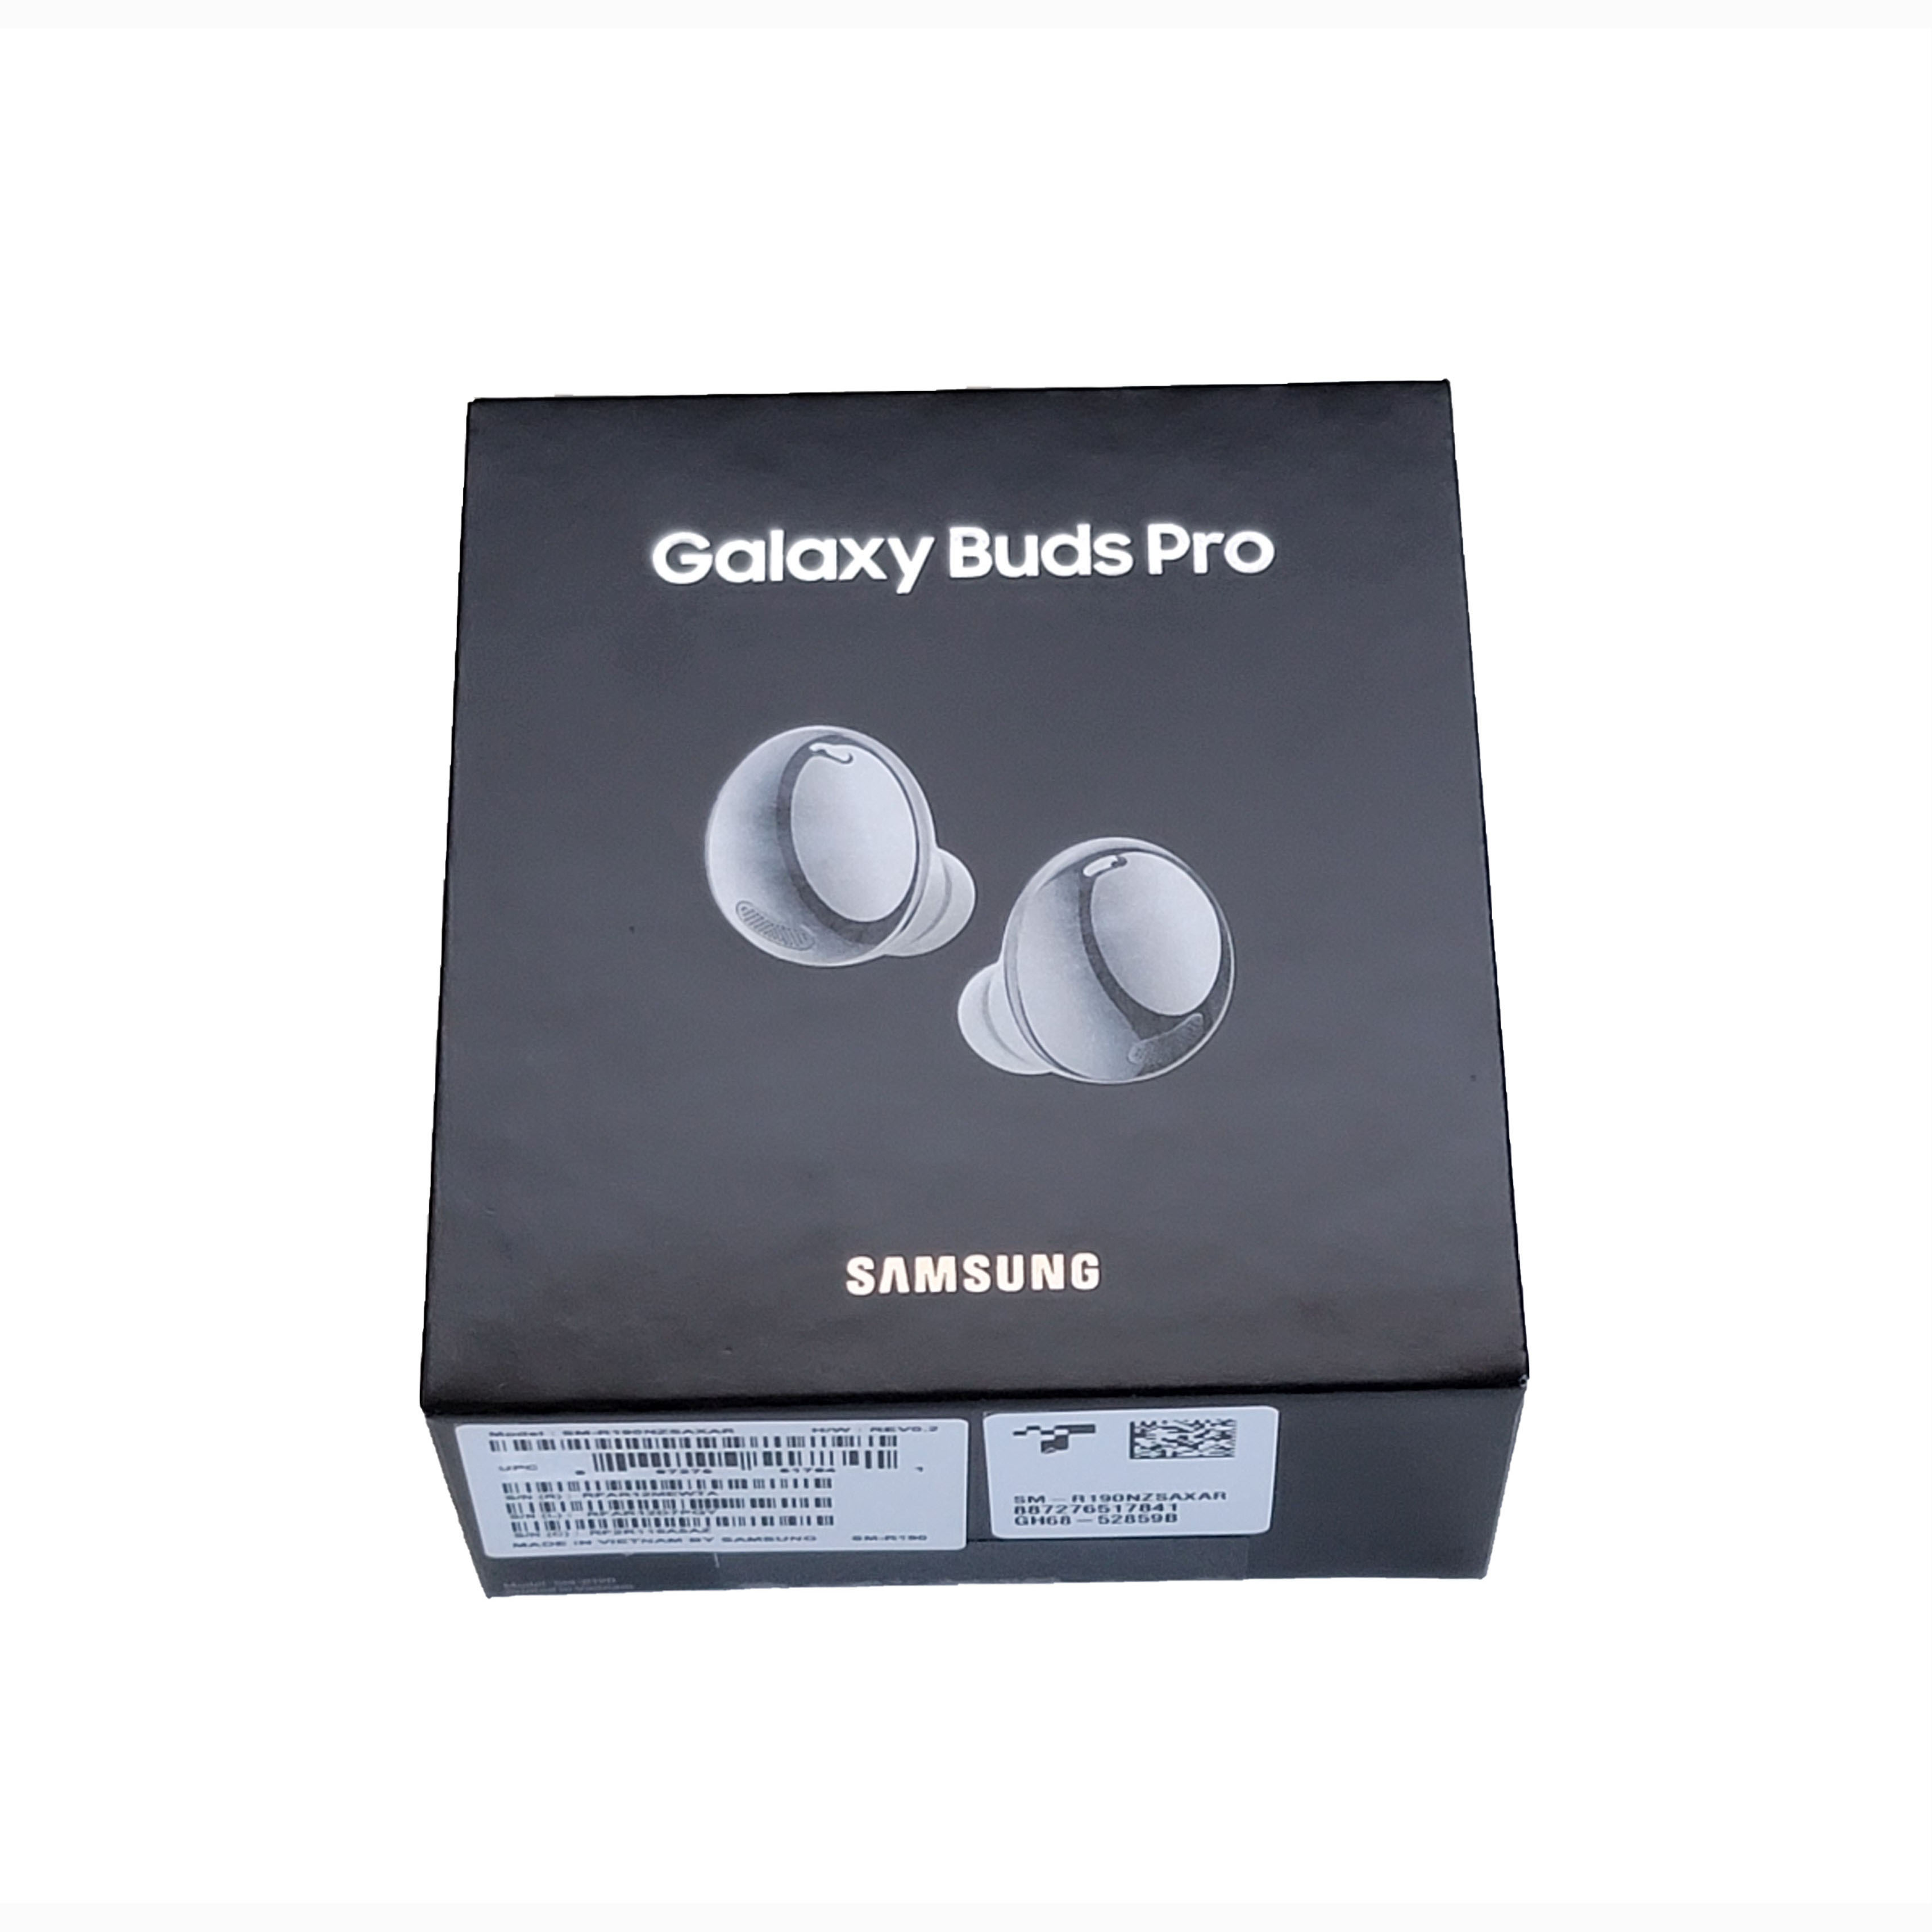 HEADSET BLUETOOTH SAMSUNG COPY 1  TWS HIGH QUALITY BUDS PRO FOR MOBILE R190NZS ,Smartphones & Tab Headsets